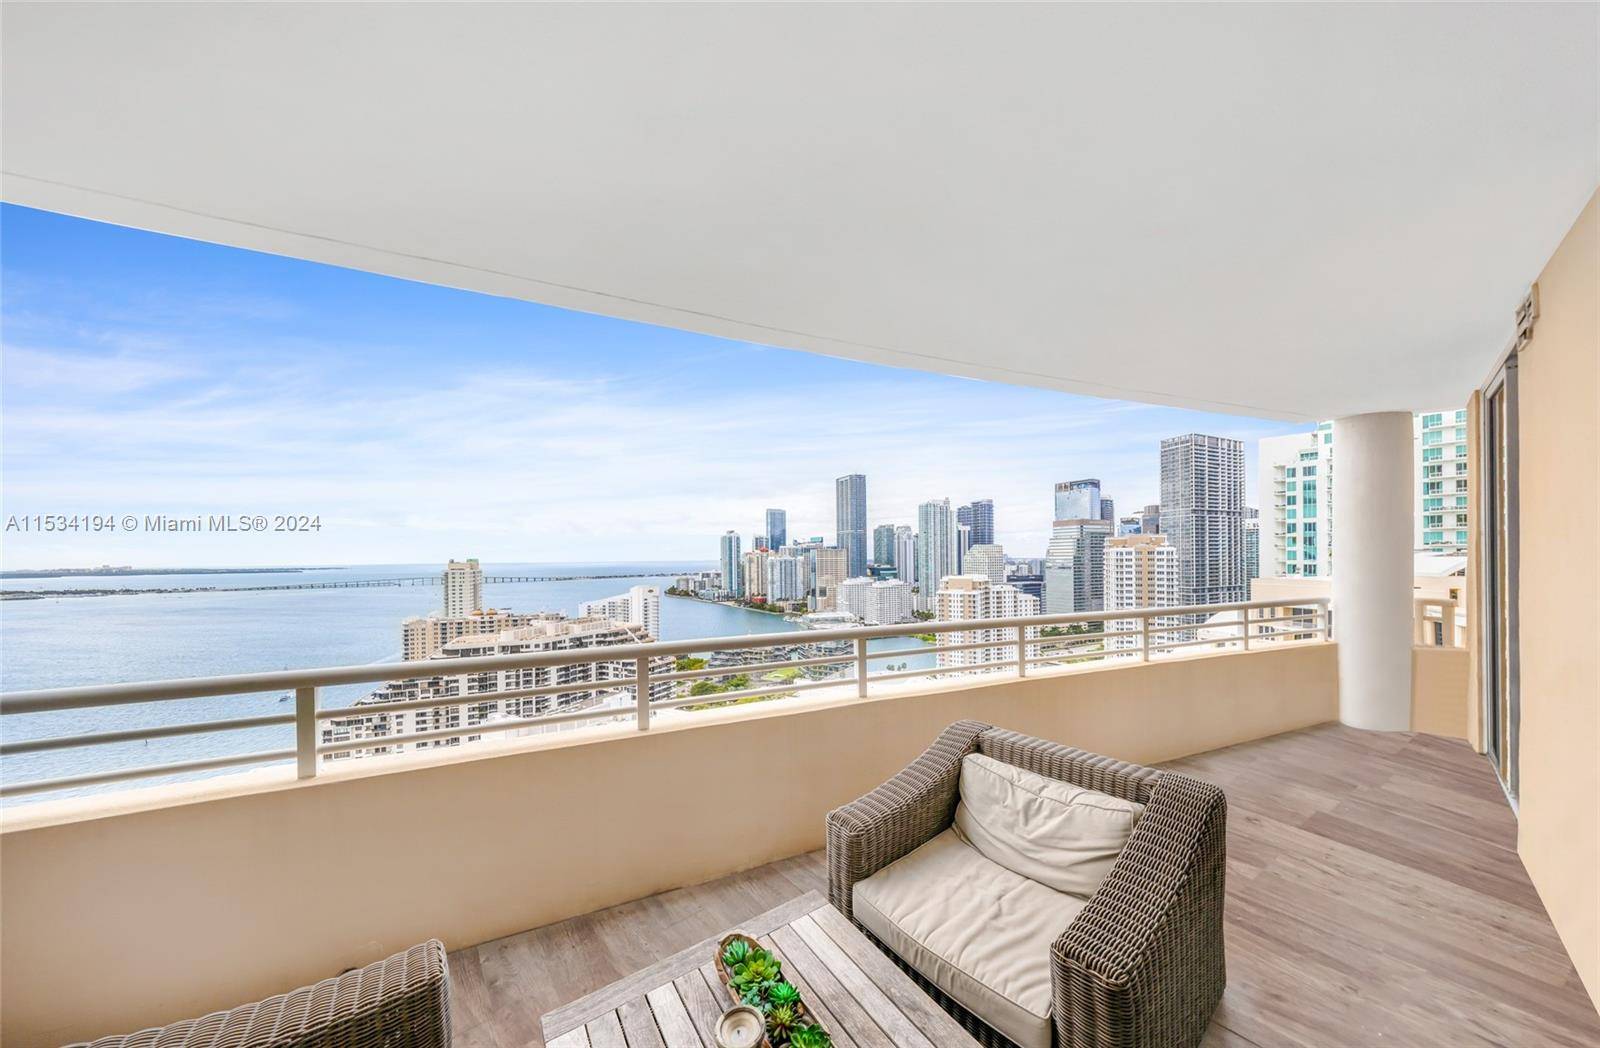 This distingushed condominium overlooking the city of Miami is one of a kind.